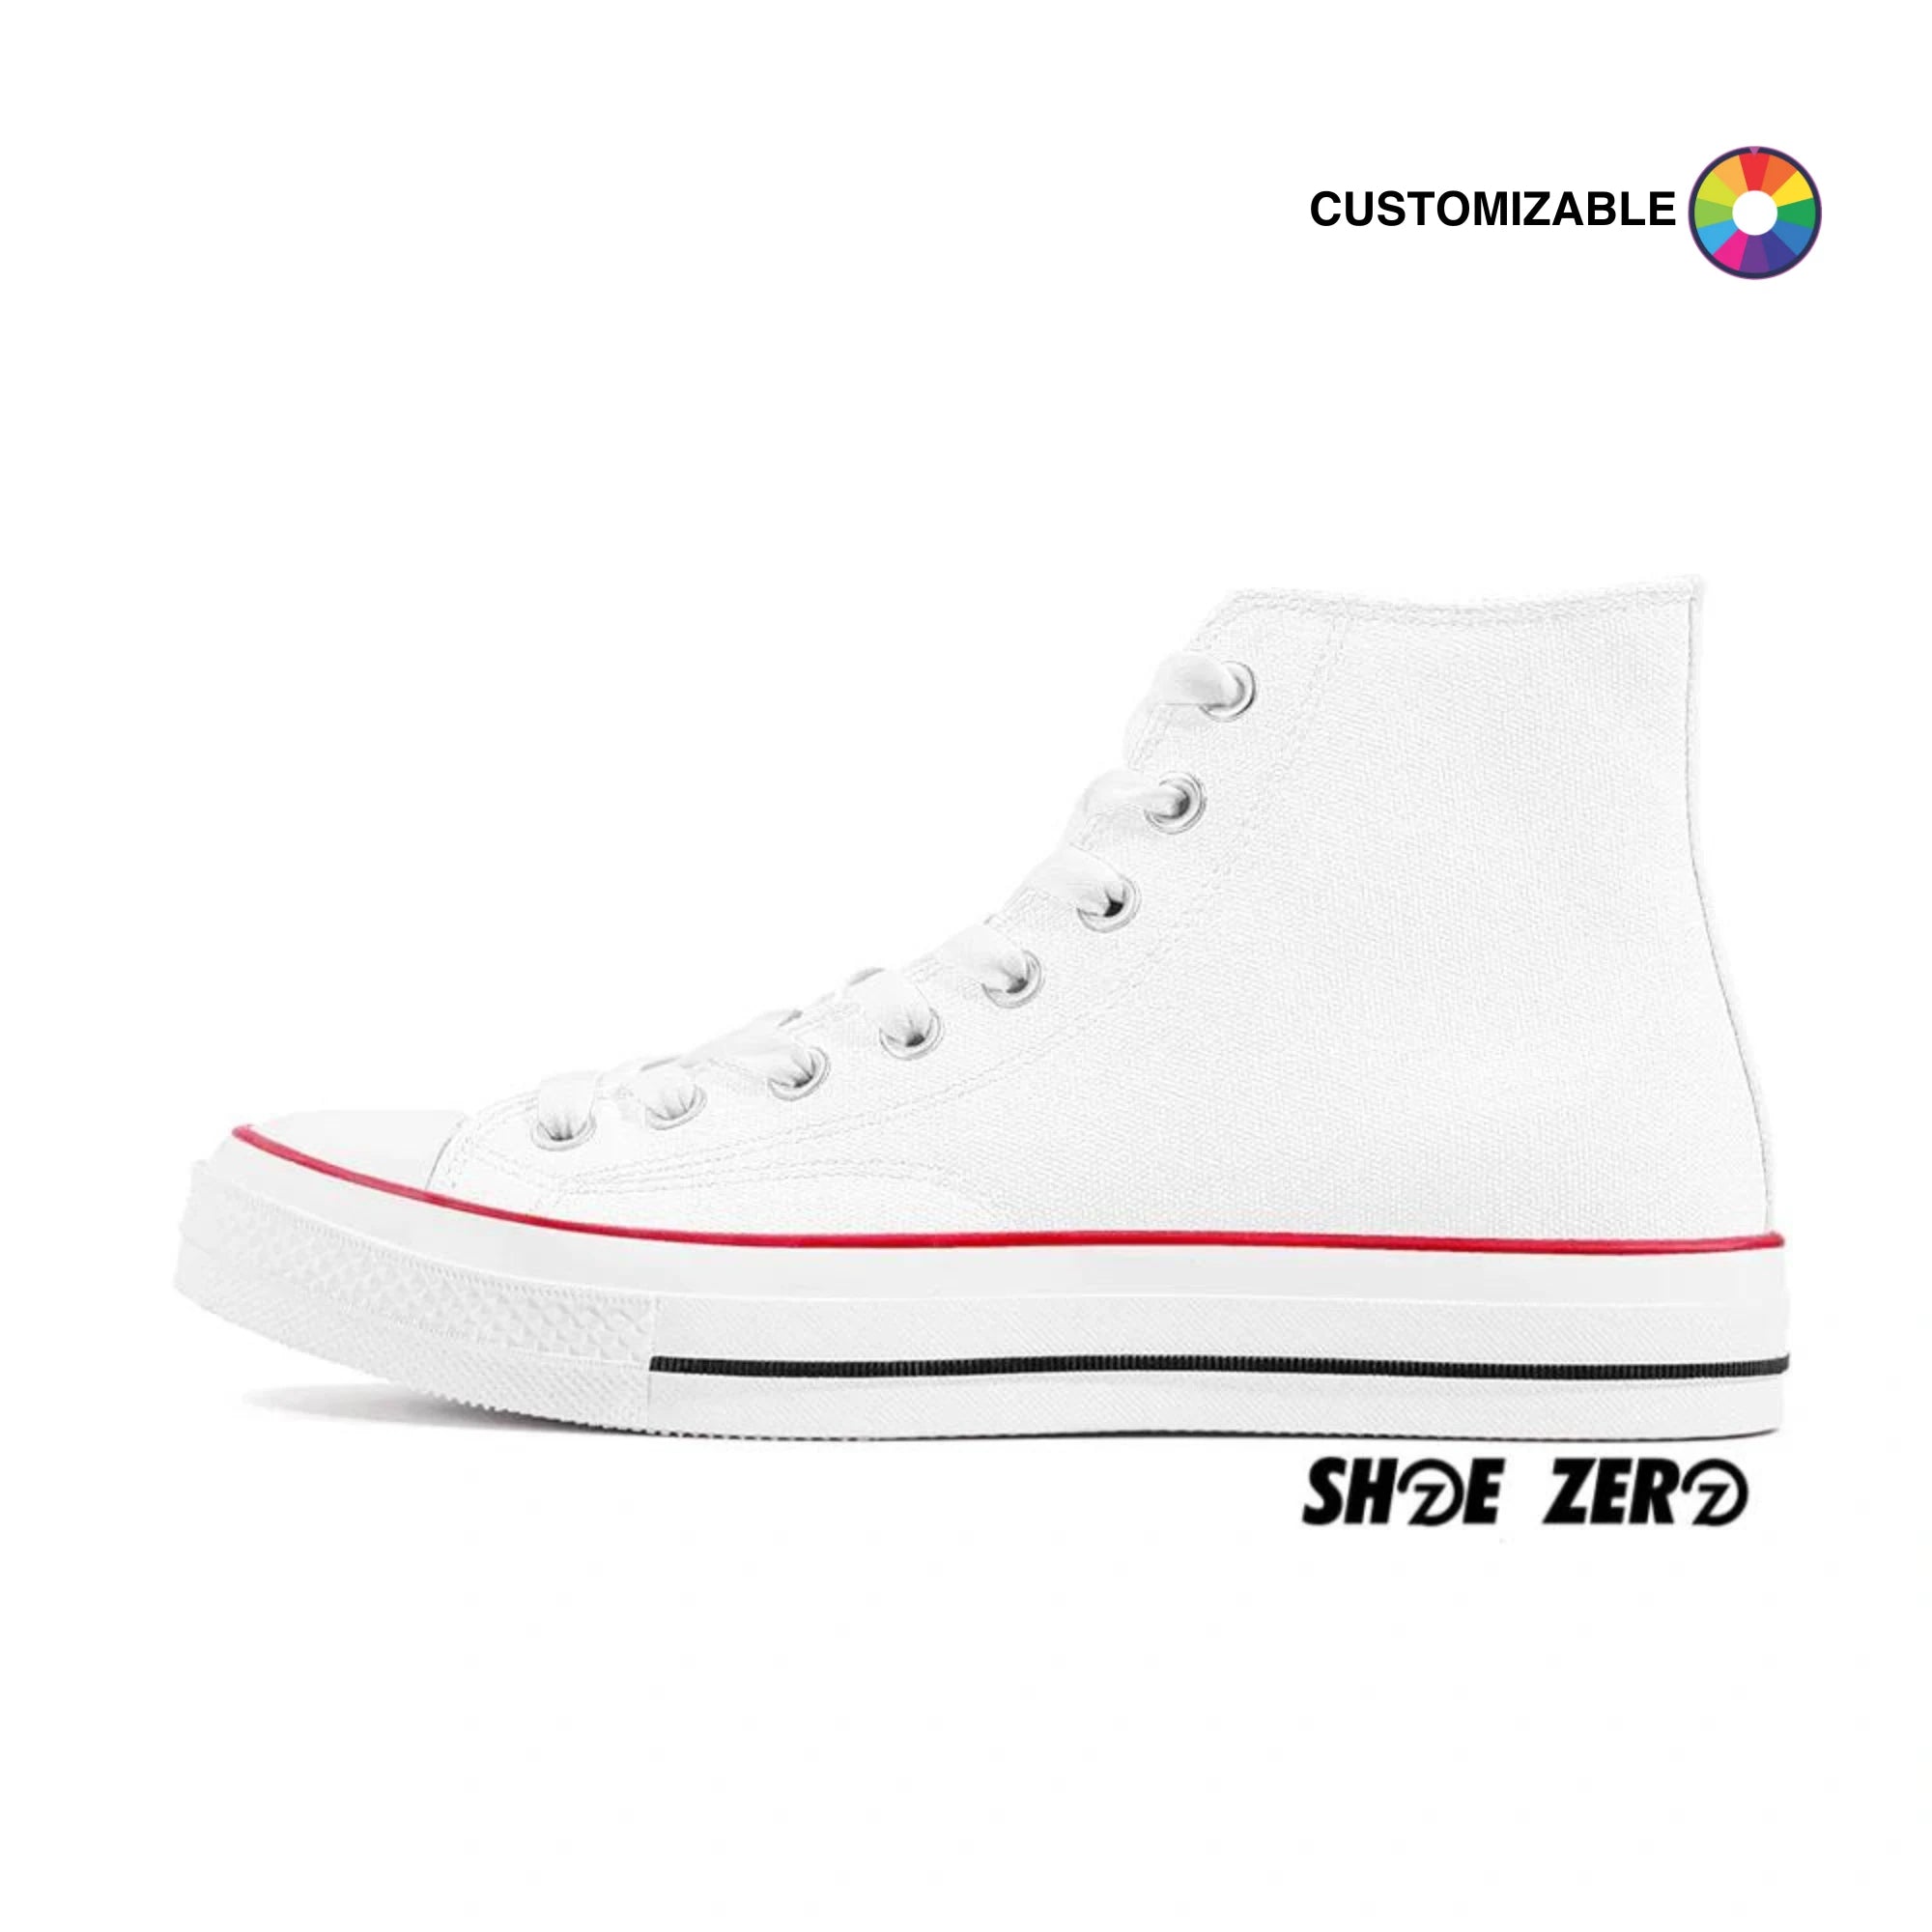 All Customizable Products by Shoe Zero